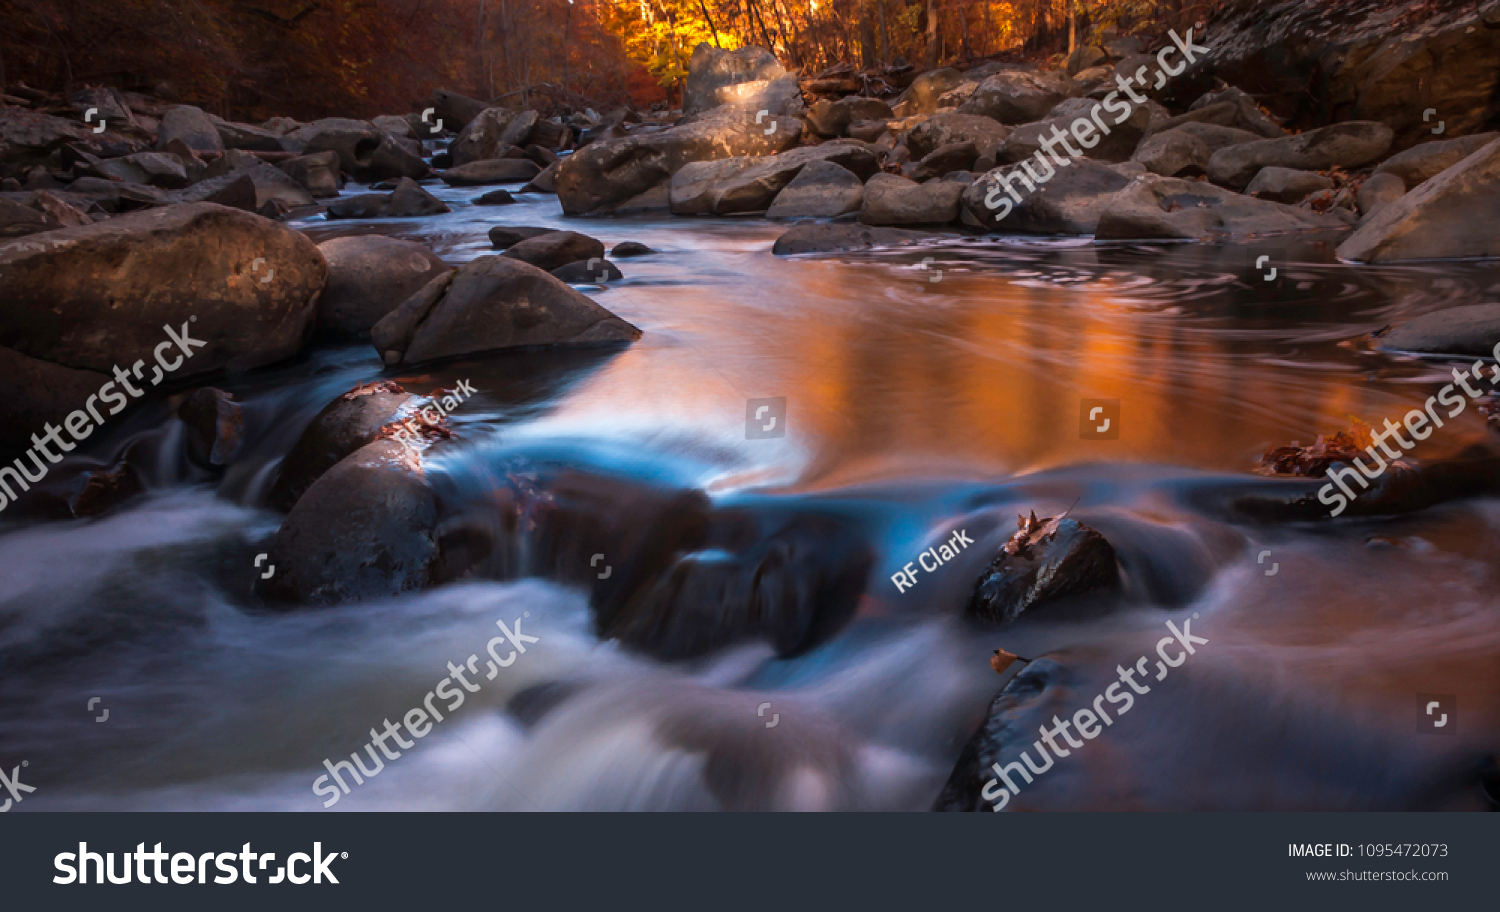 Rock Creek Pool - This long exposure image of the pool inside Rock Creek Park captures the autumn colors of orange and yellow.  It is located between Silver Spring MD and Washington DC #1095472073